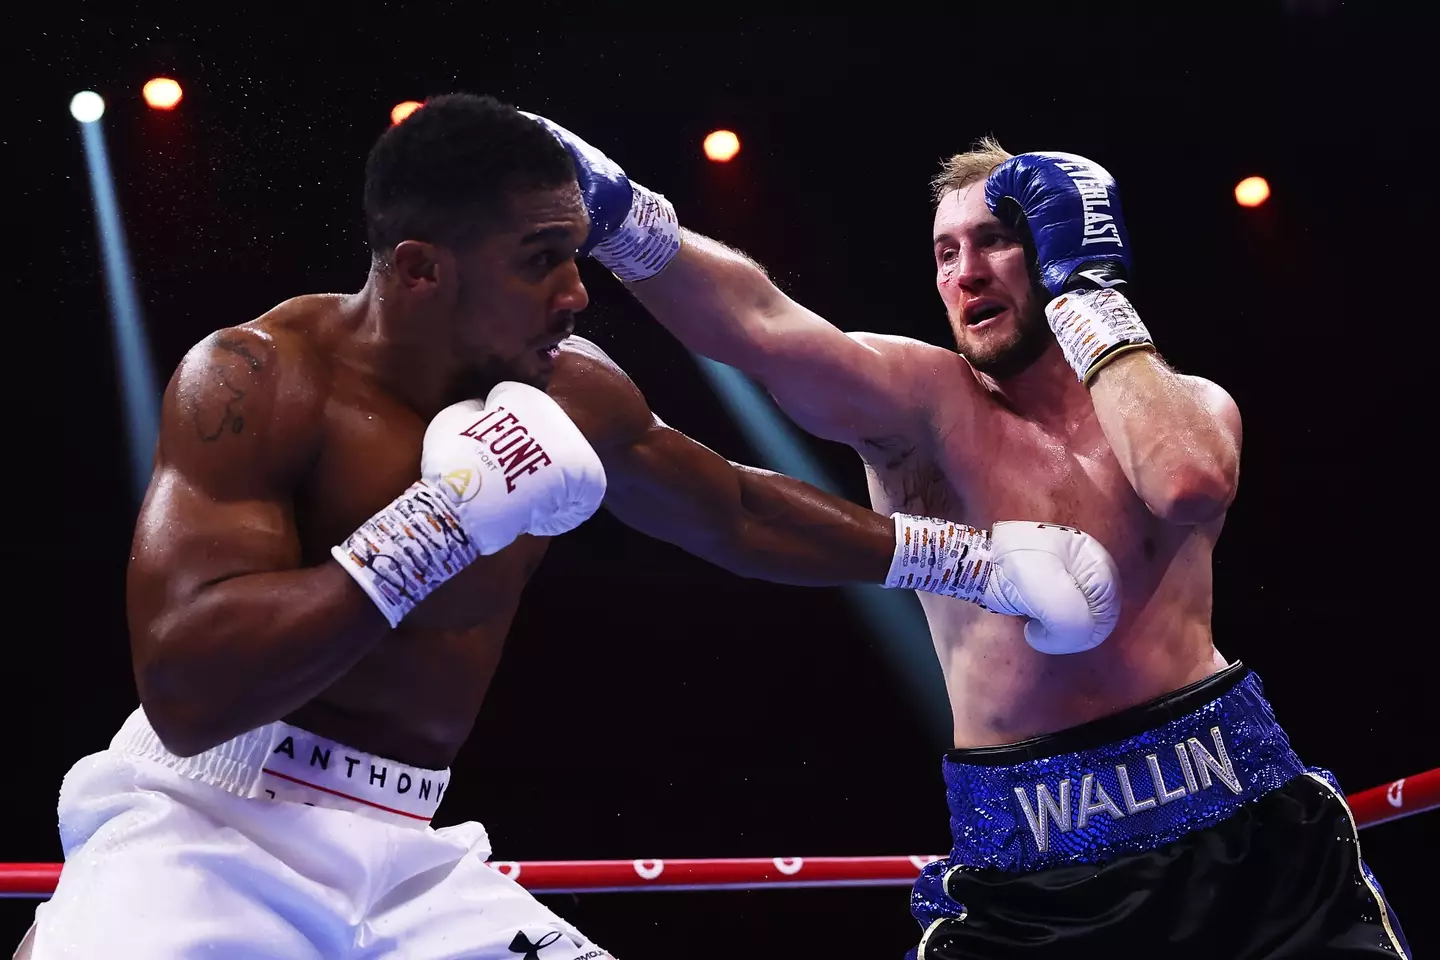 Anthony Joshua stormed to victory over Otto Wallin in five rounds.